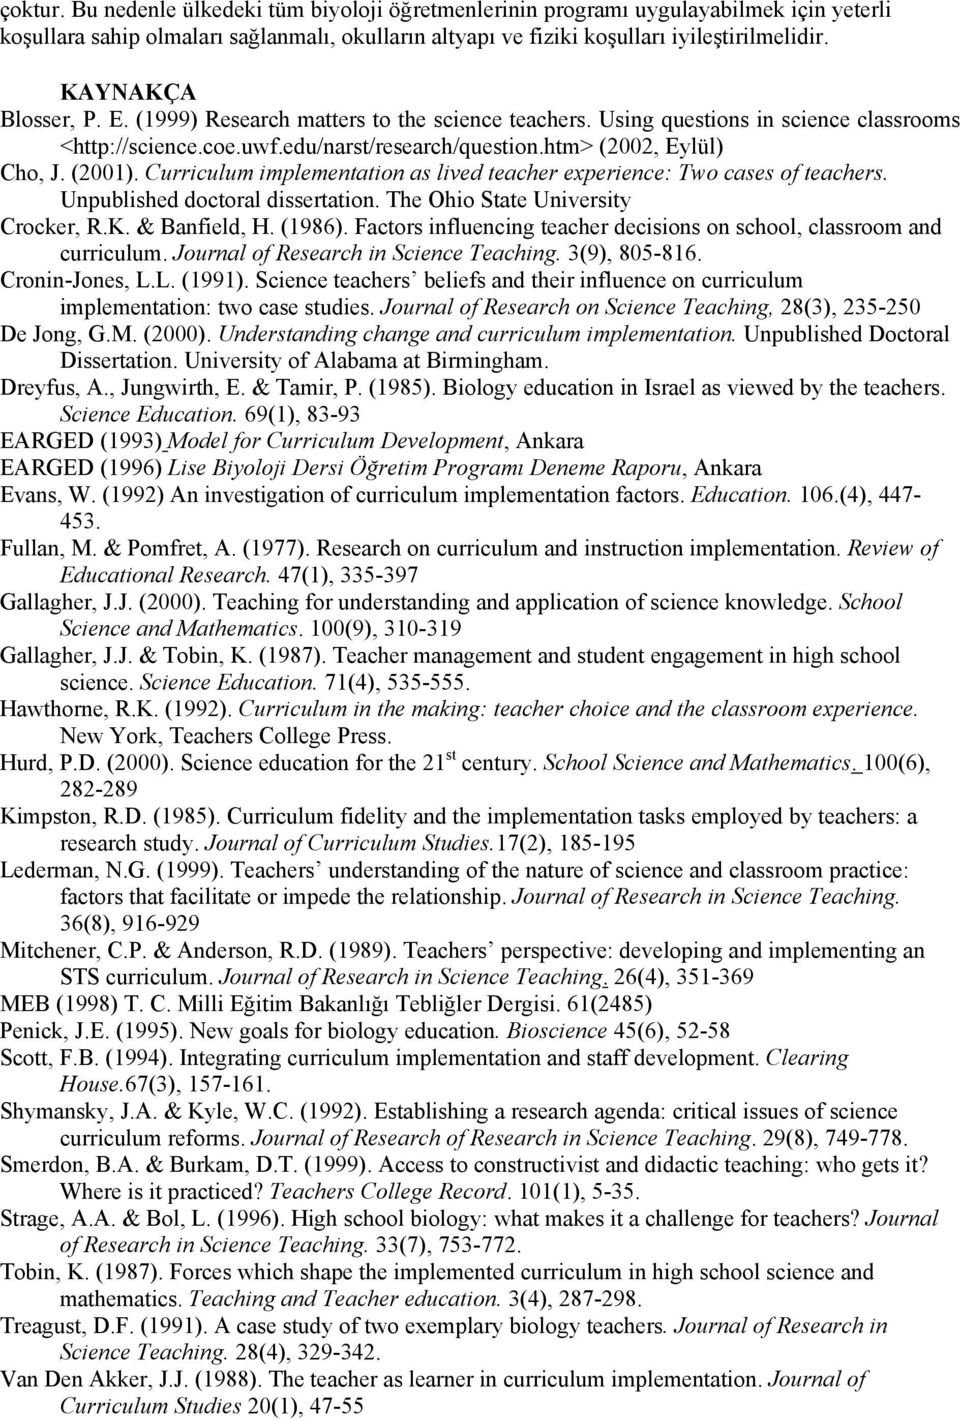 Curriculum implementation as lived teacher experience: Two cases of teachers. Unpublished doctoral dissertation. The Ohio State University Crocker, R.K. & Banfield, H. (1986).